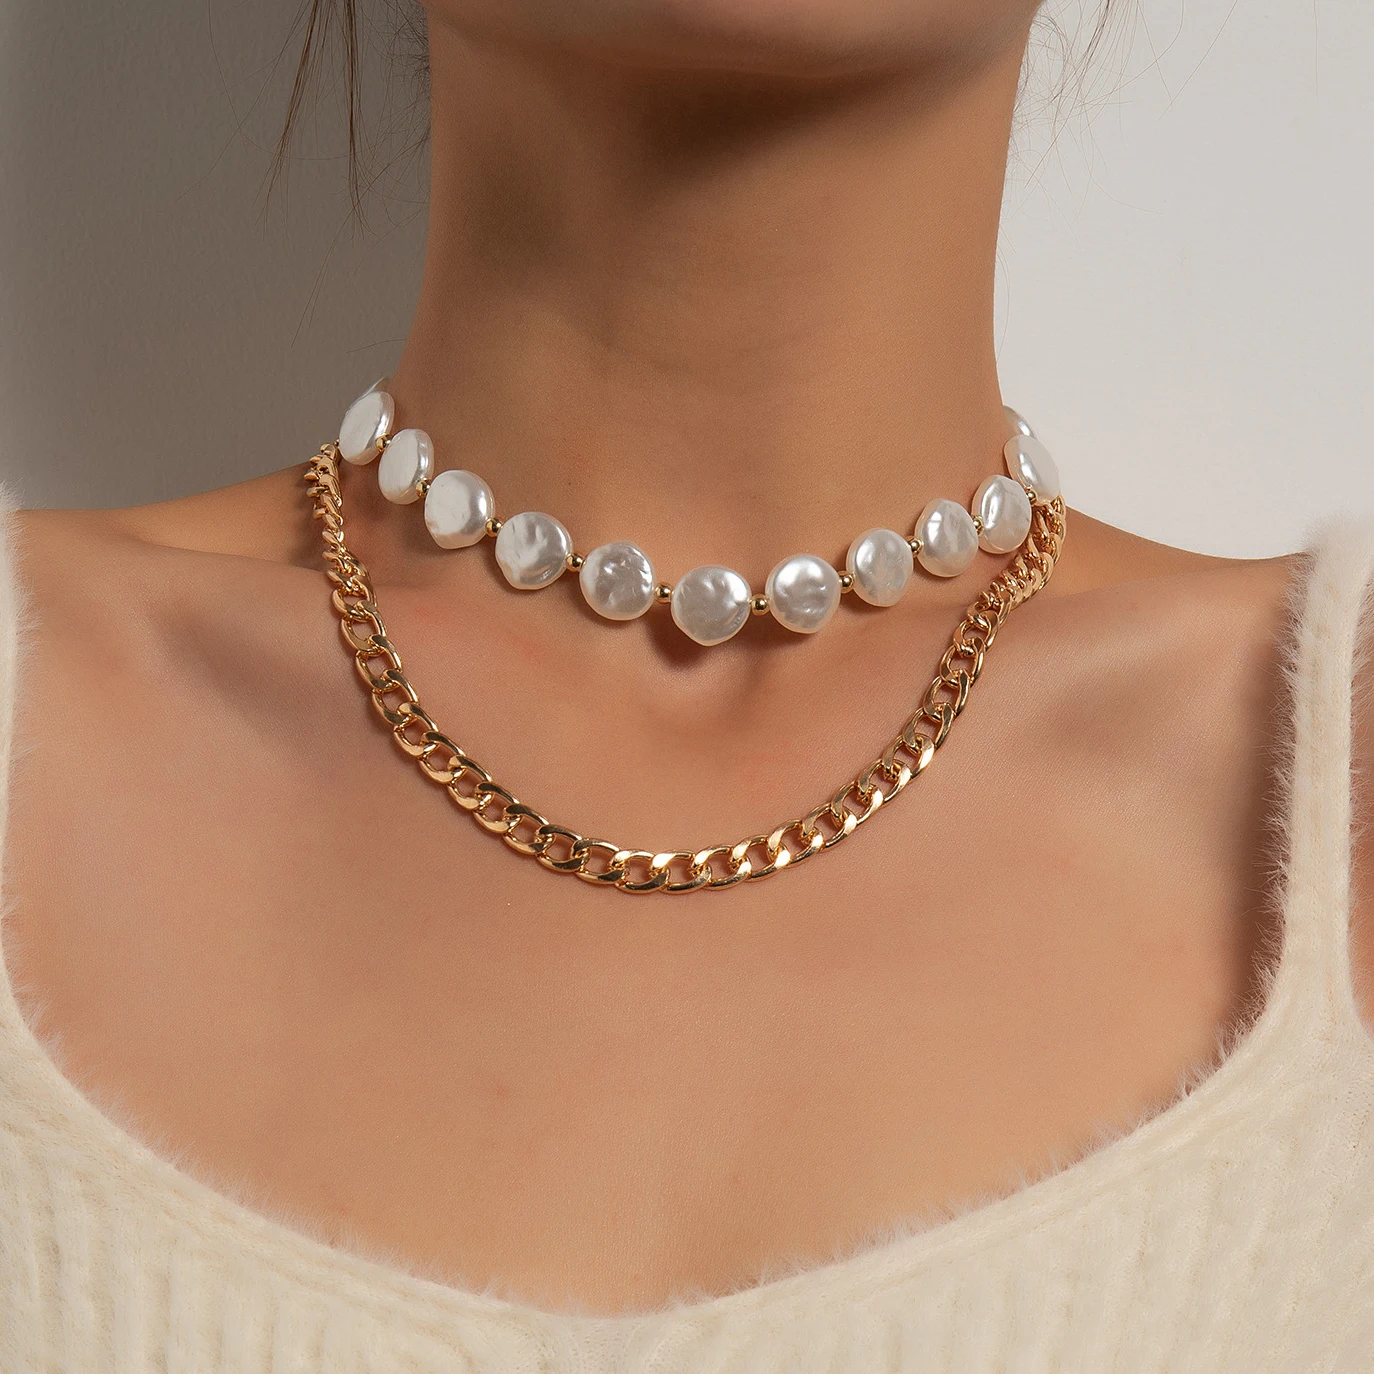 

Ingemark Vintage Multilayer Baroque Pearl Choker Necklace for Women Girls Unique Cuban Curb Smooth Clavicle Chain Neck Jewelry